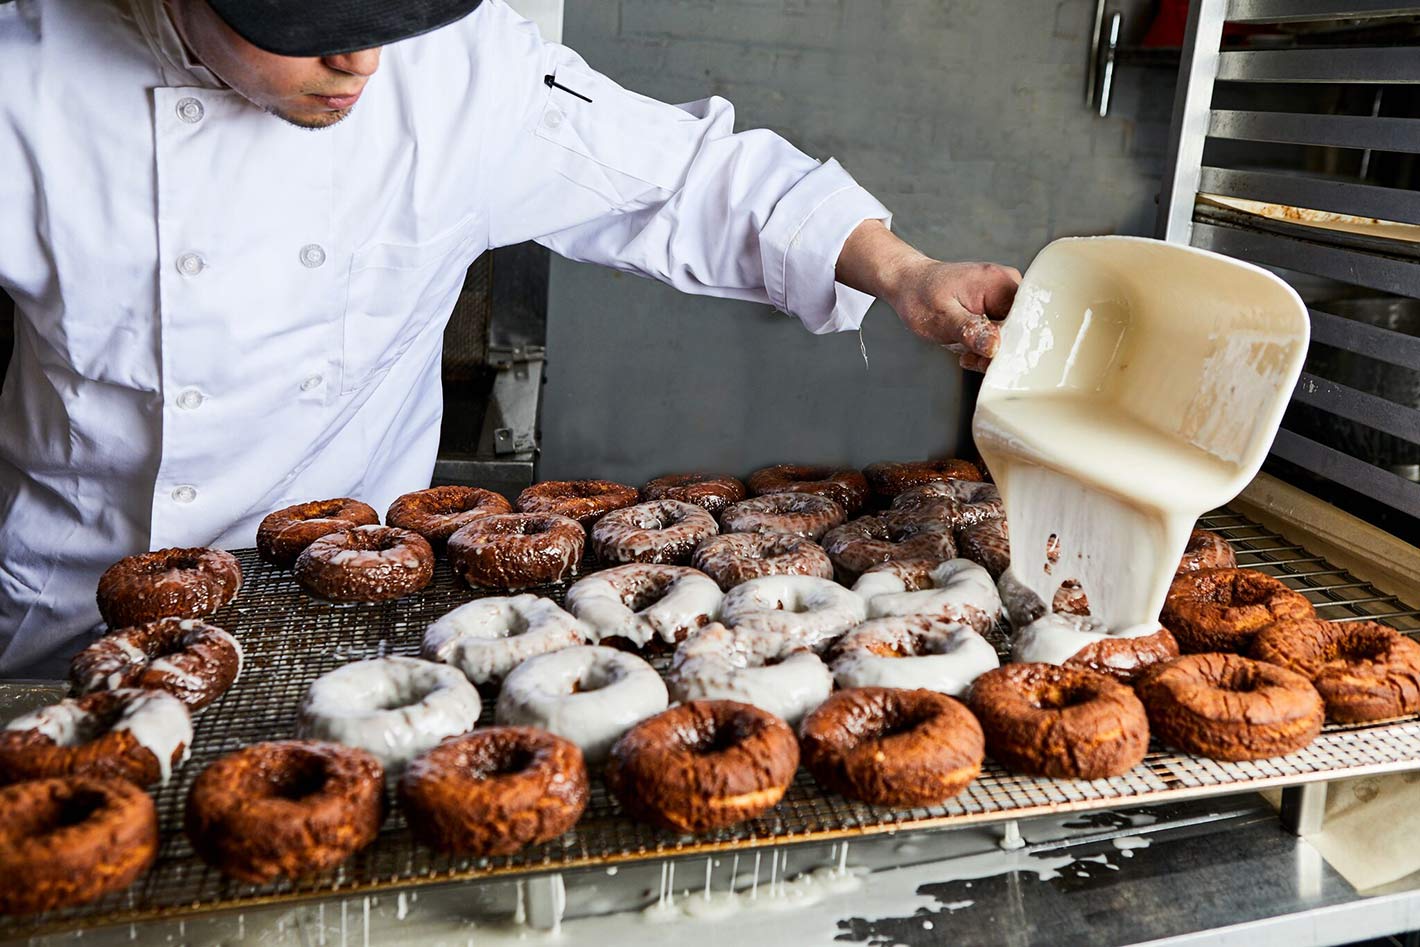 Pouring glaze on donuts